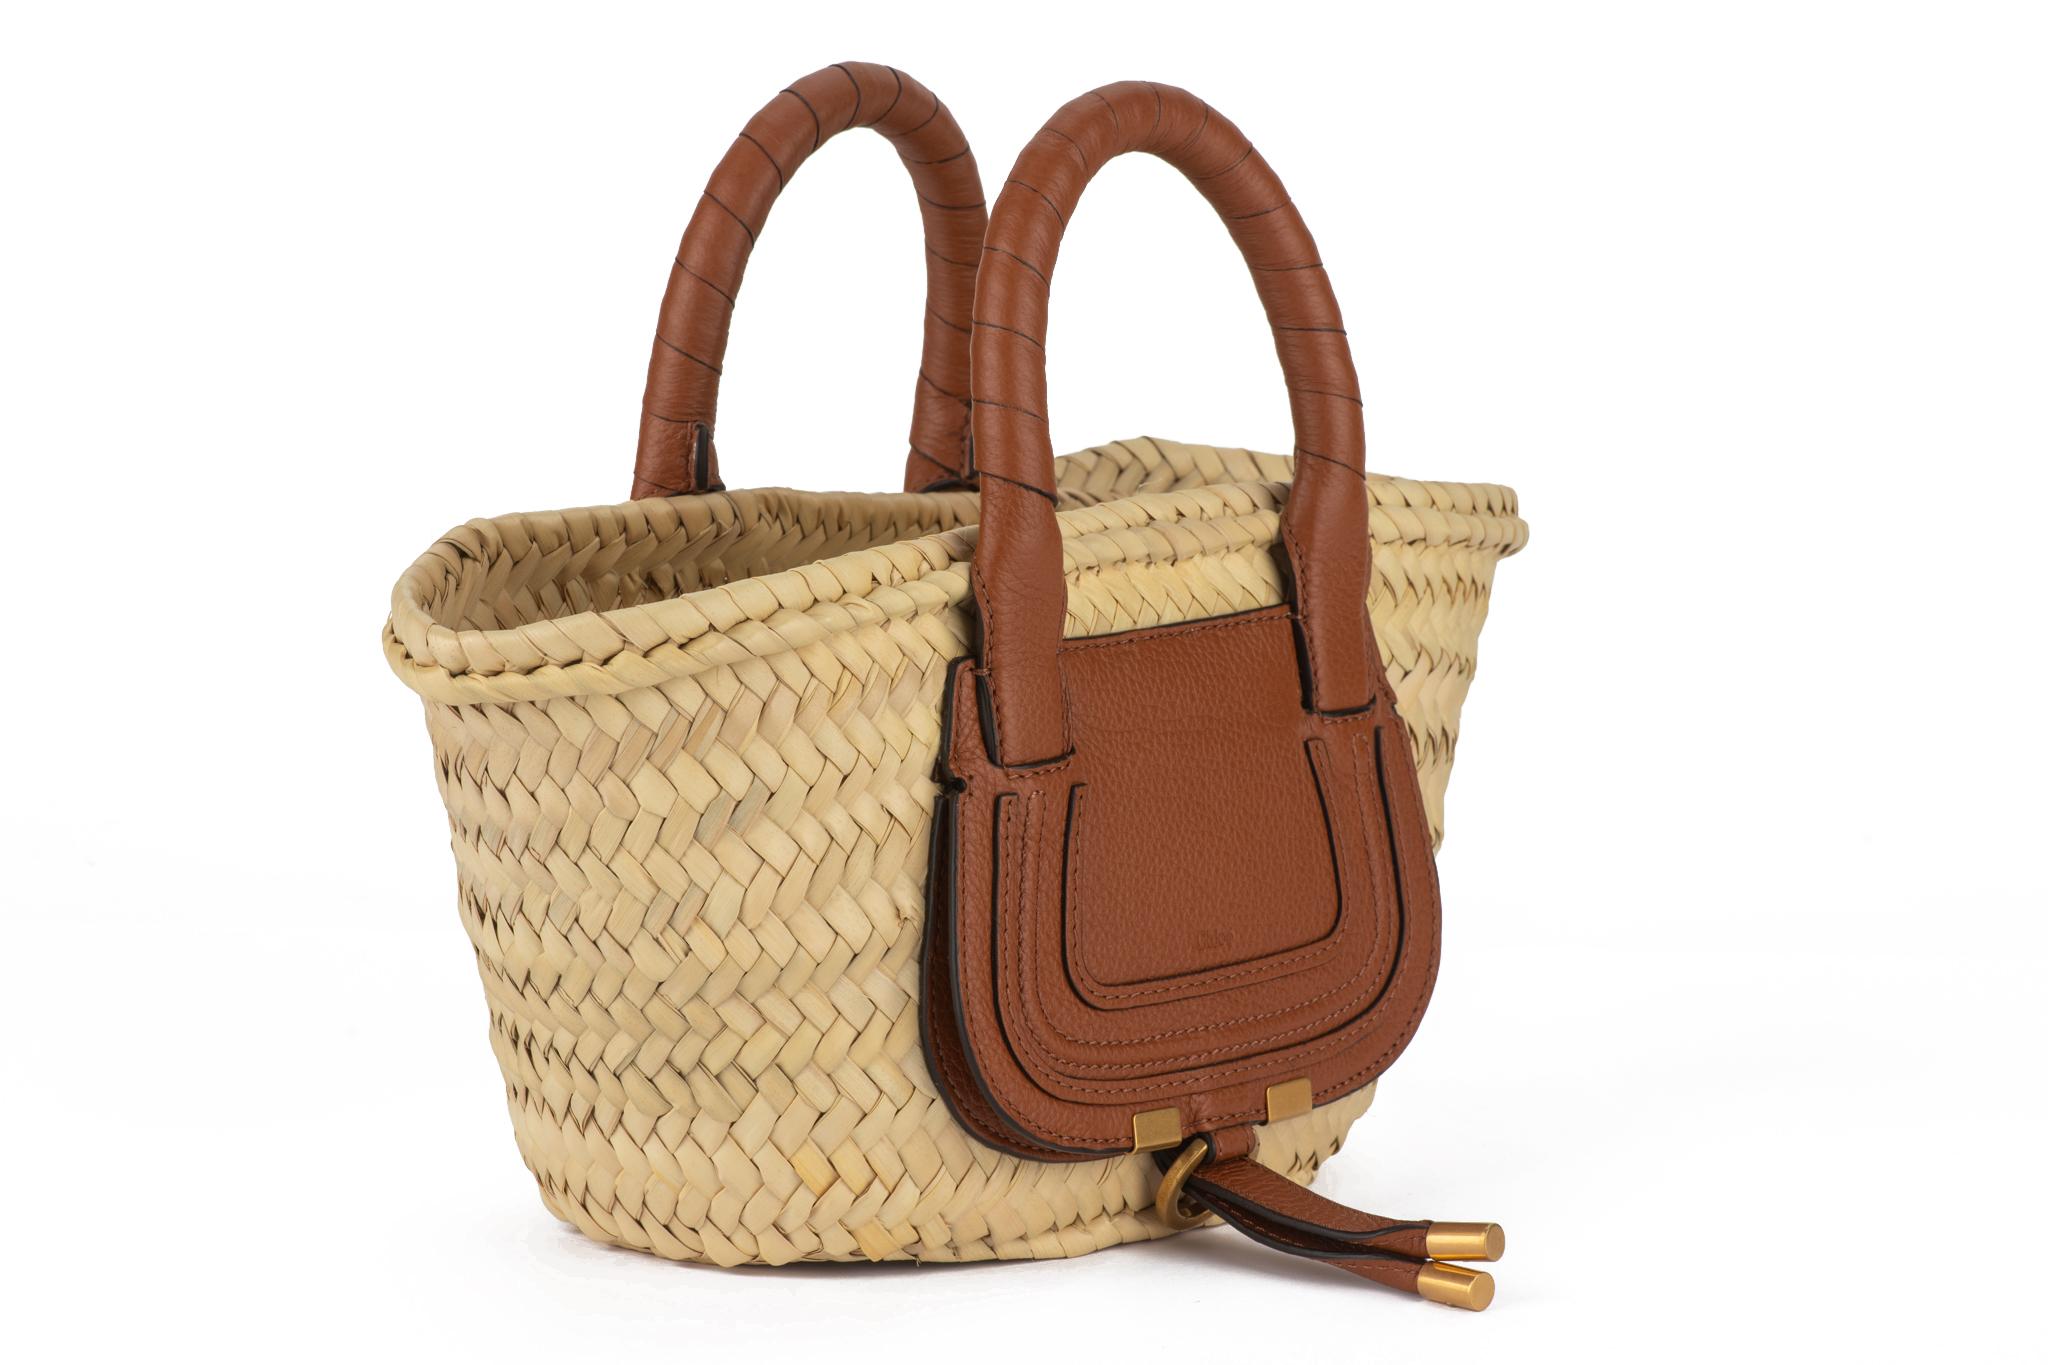 Chloe’ brand new mini basket, made of palm leaves and brown natural leather. Gold brass metal hardware. Handle drop 3.5”. 
Comes with identity card, tag and original dustcover.